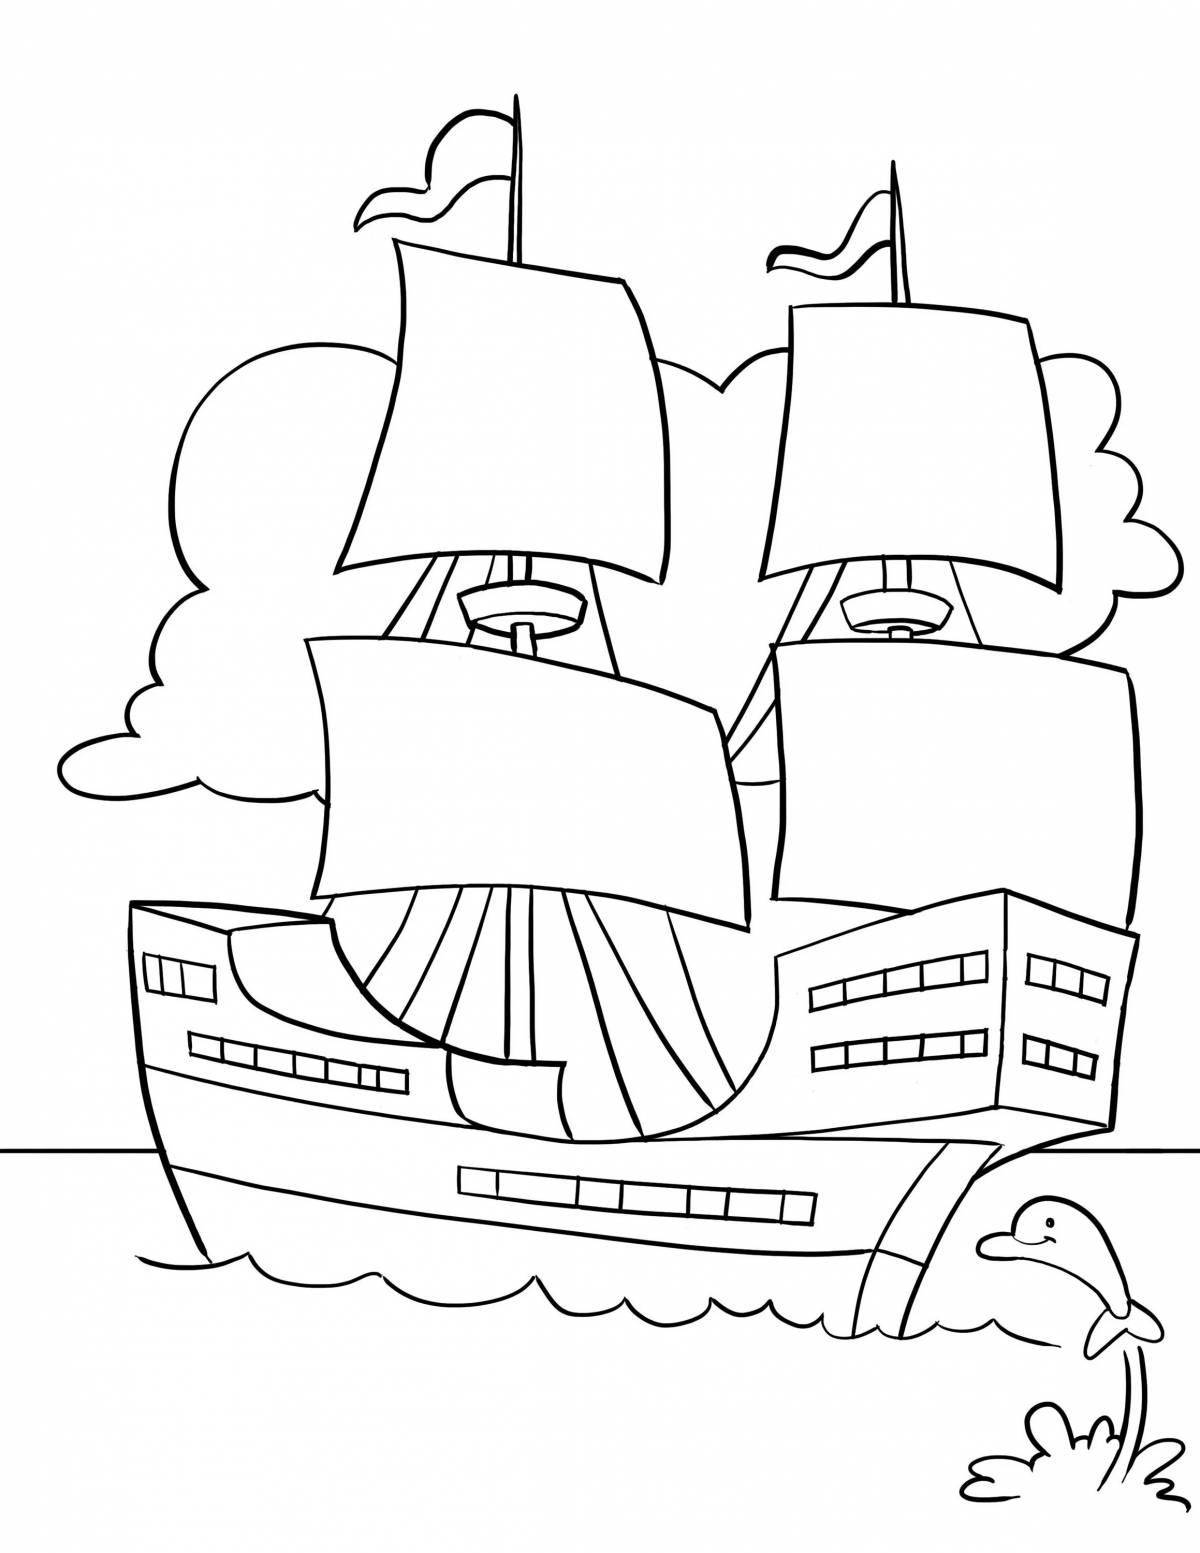 Colored ship for kids